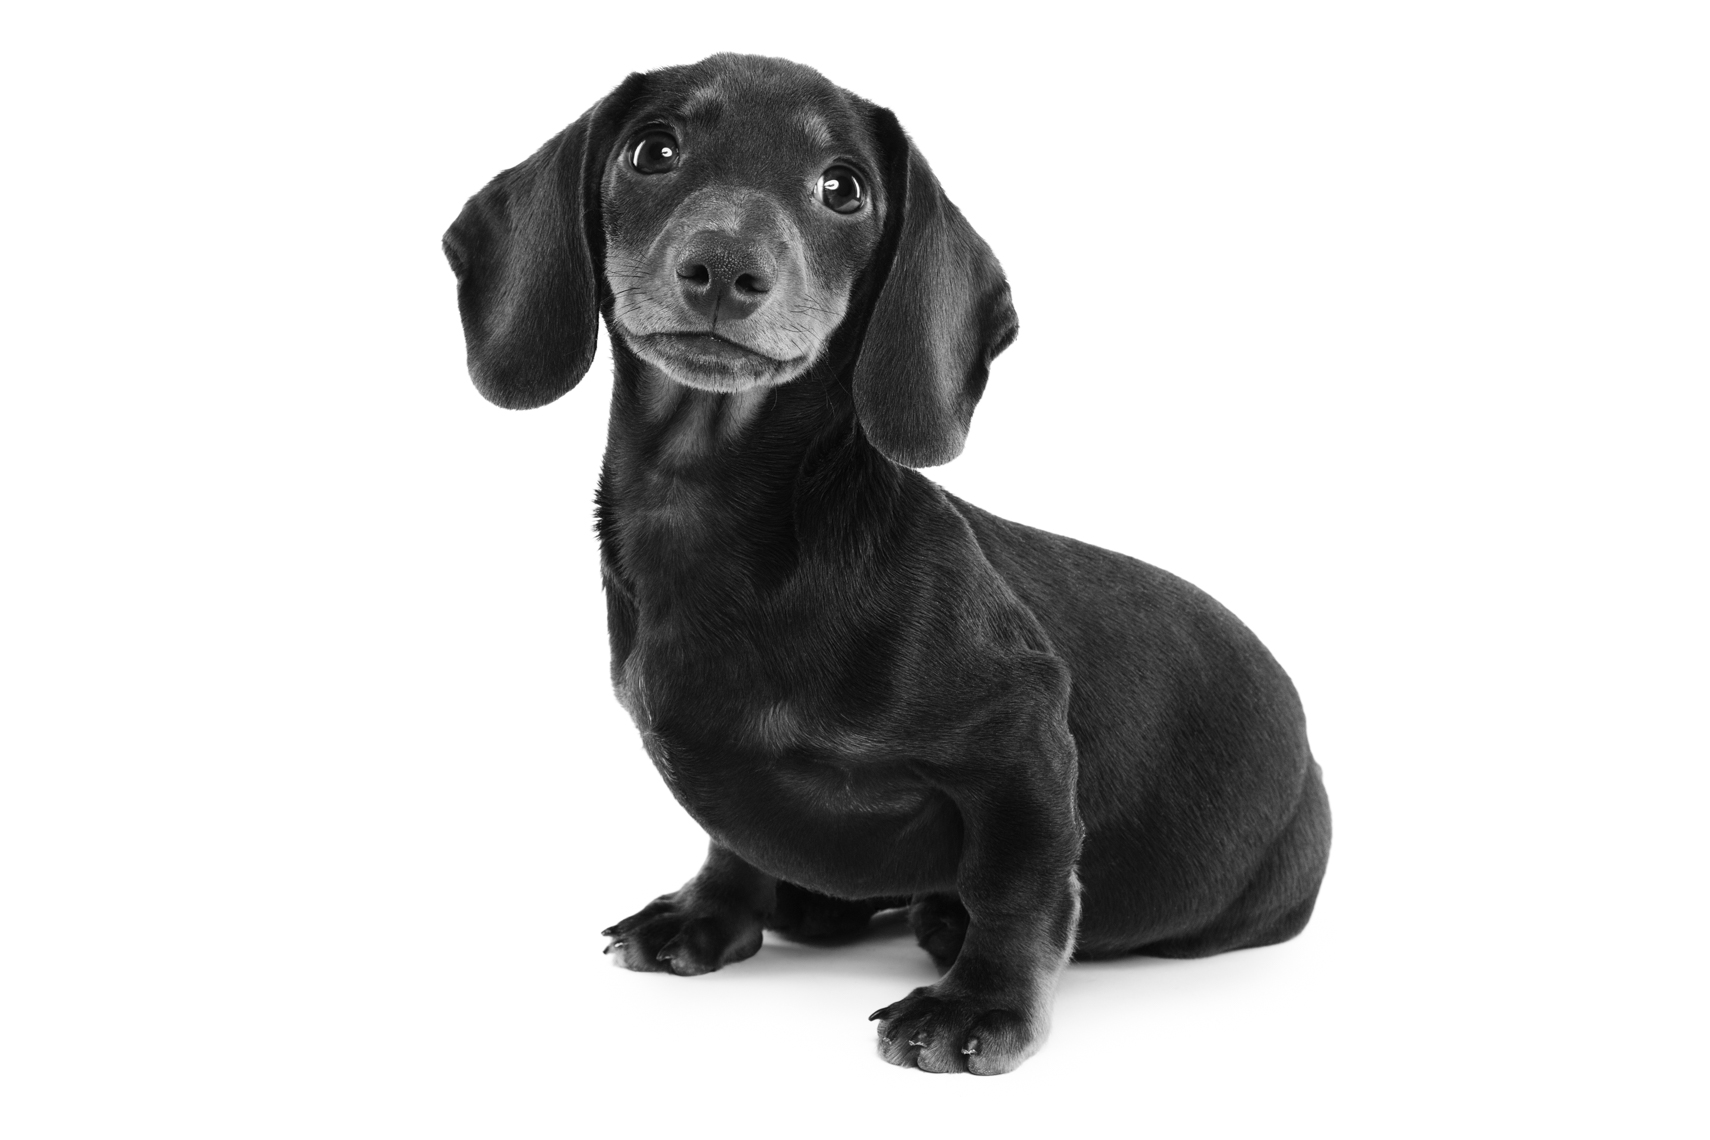 Black and White portrait of a dachshund